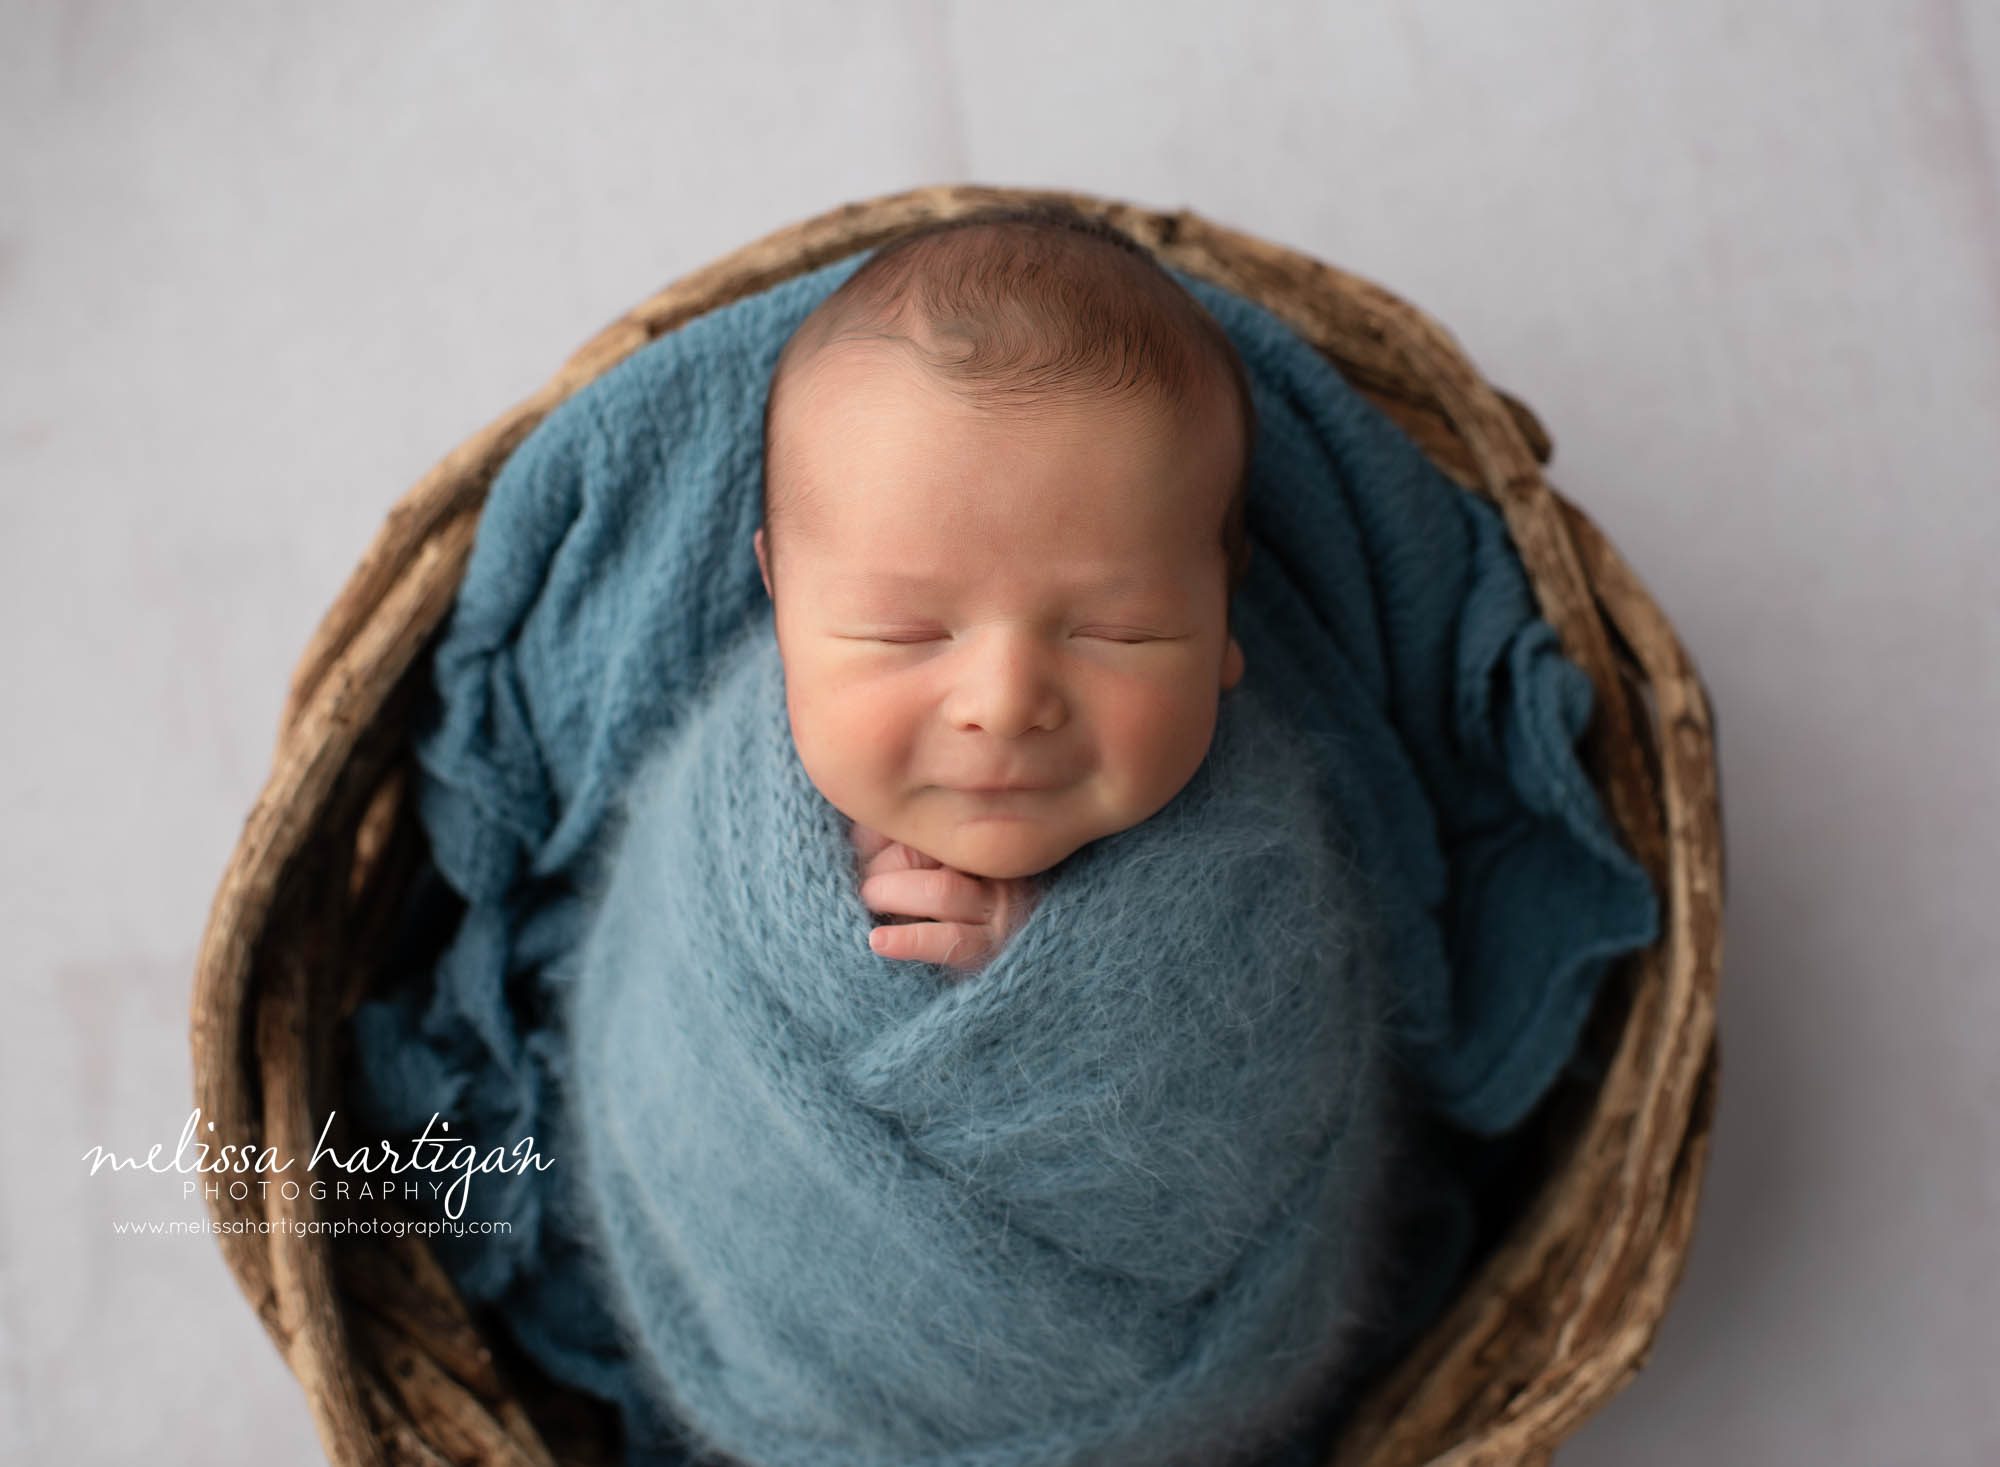 newborn baby boy wrapped in teal blue knitted wrap posed in wicker basket Connecticut newborn photographer